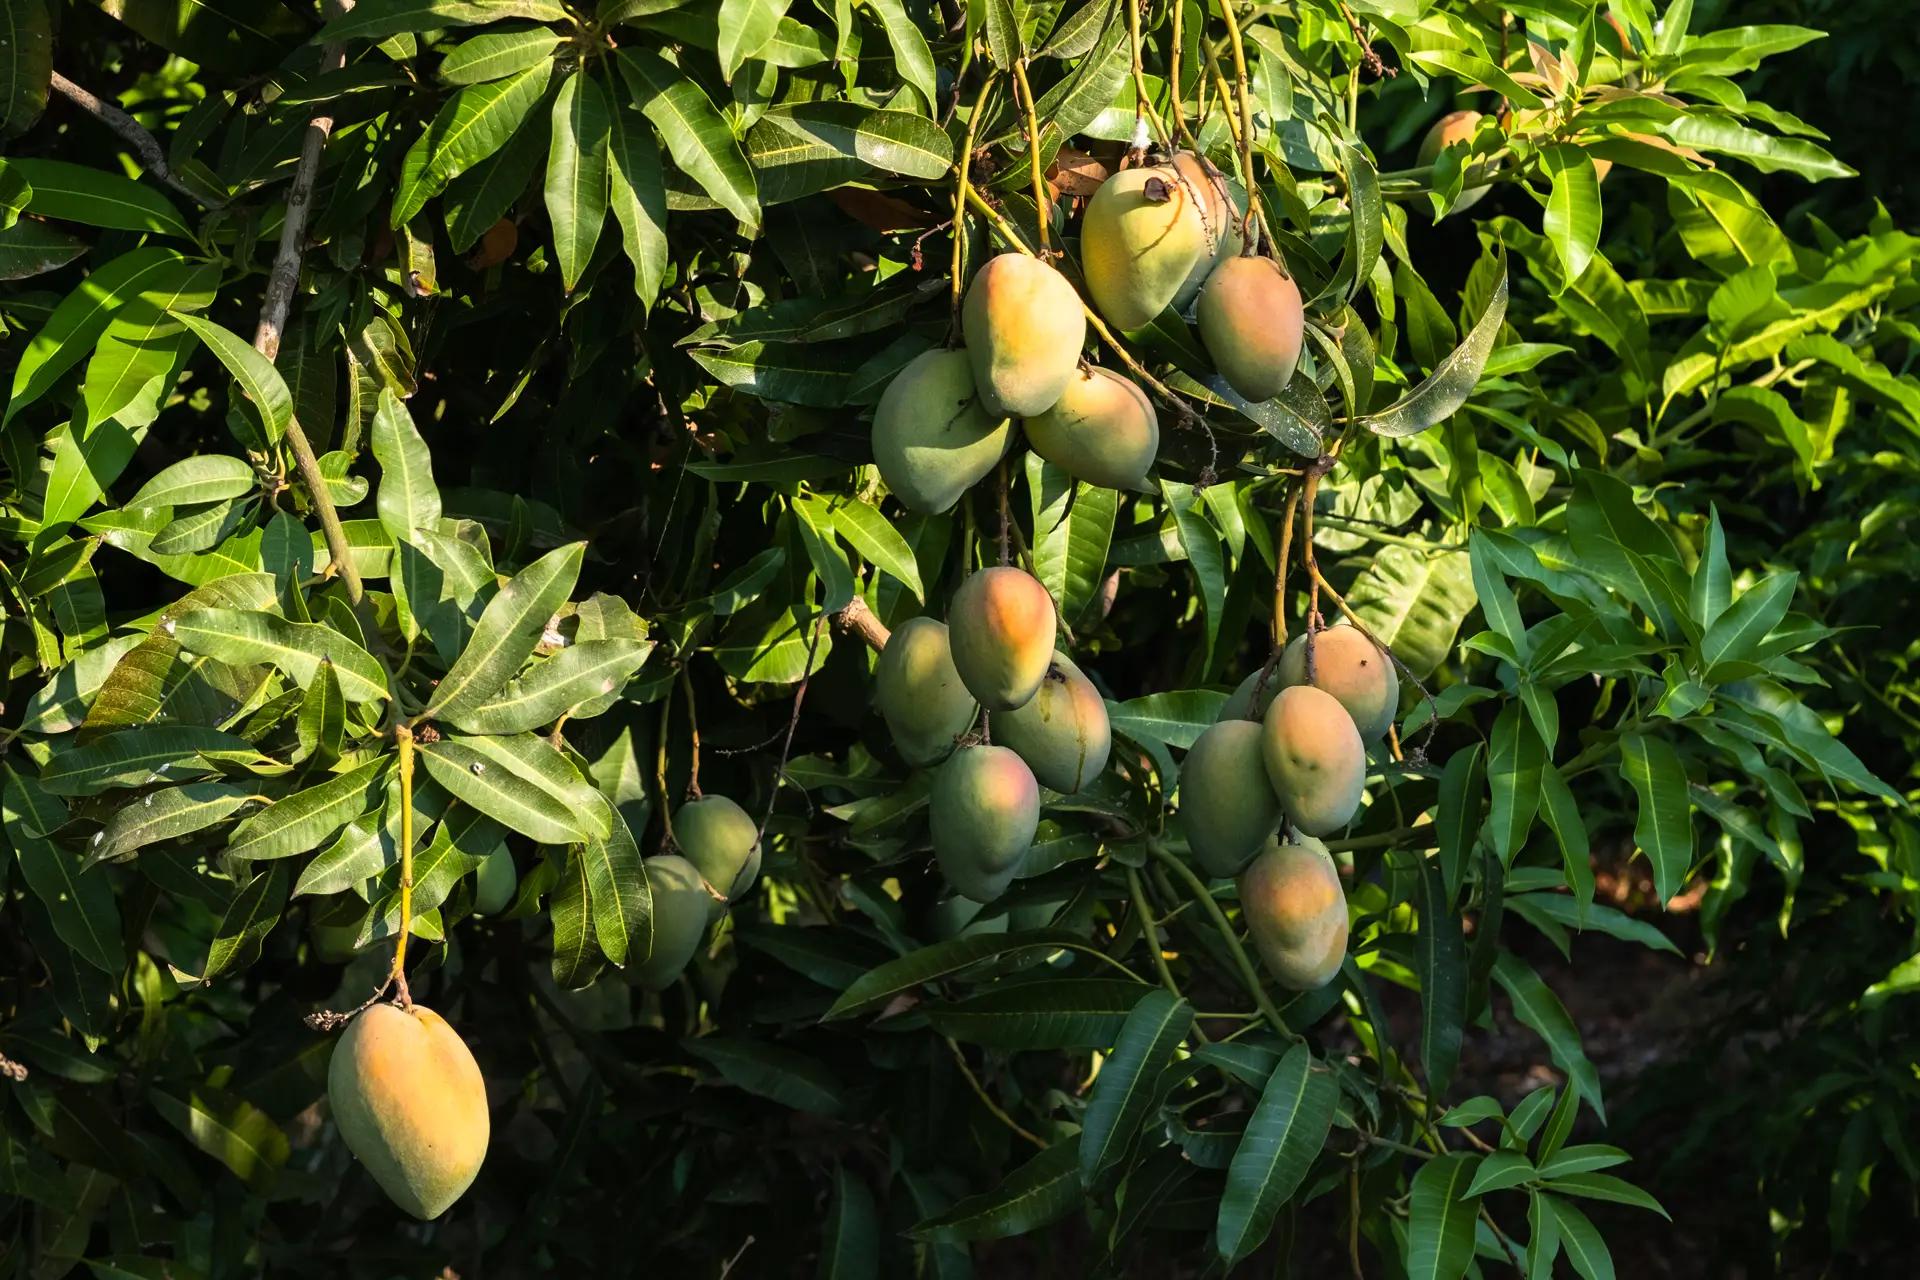 Mangoes hanging on a tree - picture taken by Anna-Maria Weinhold